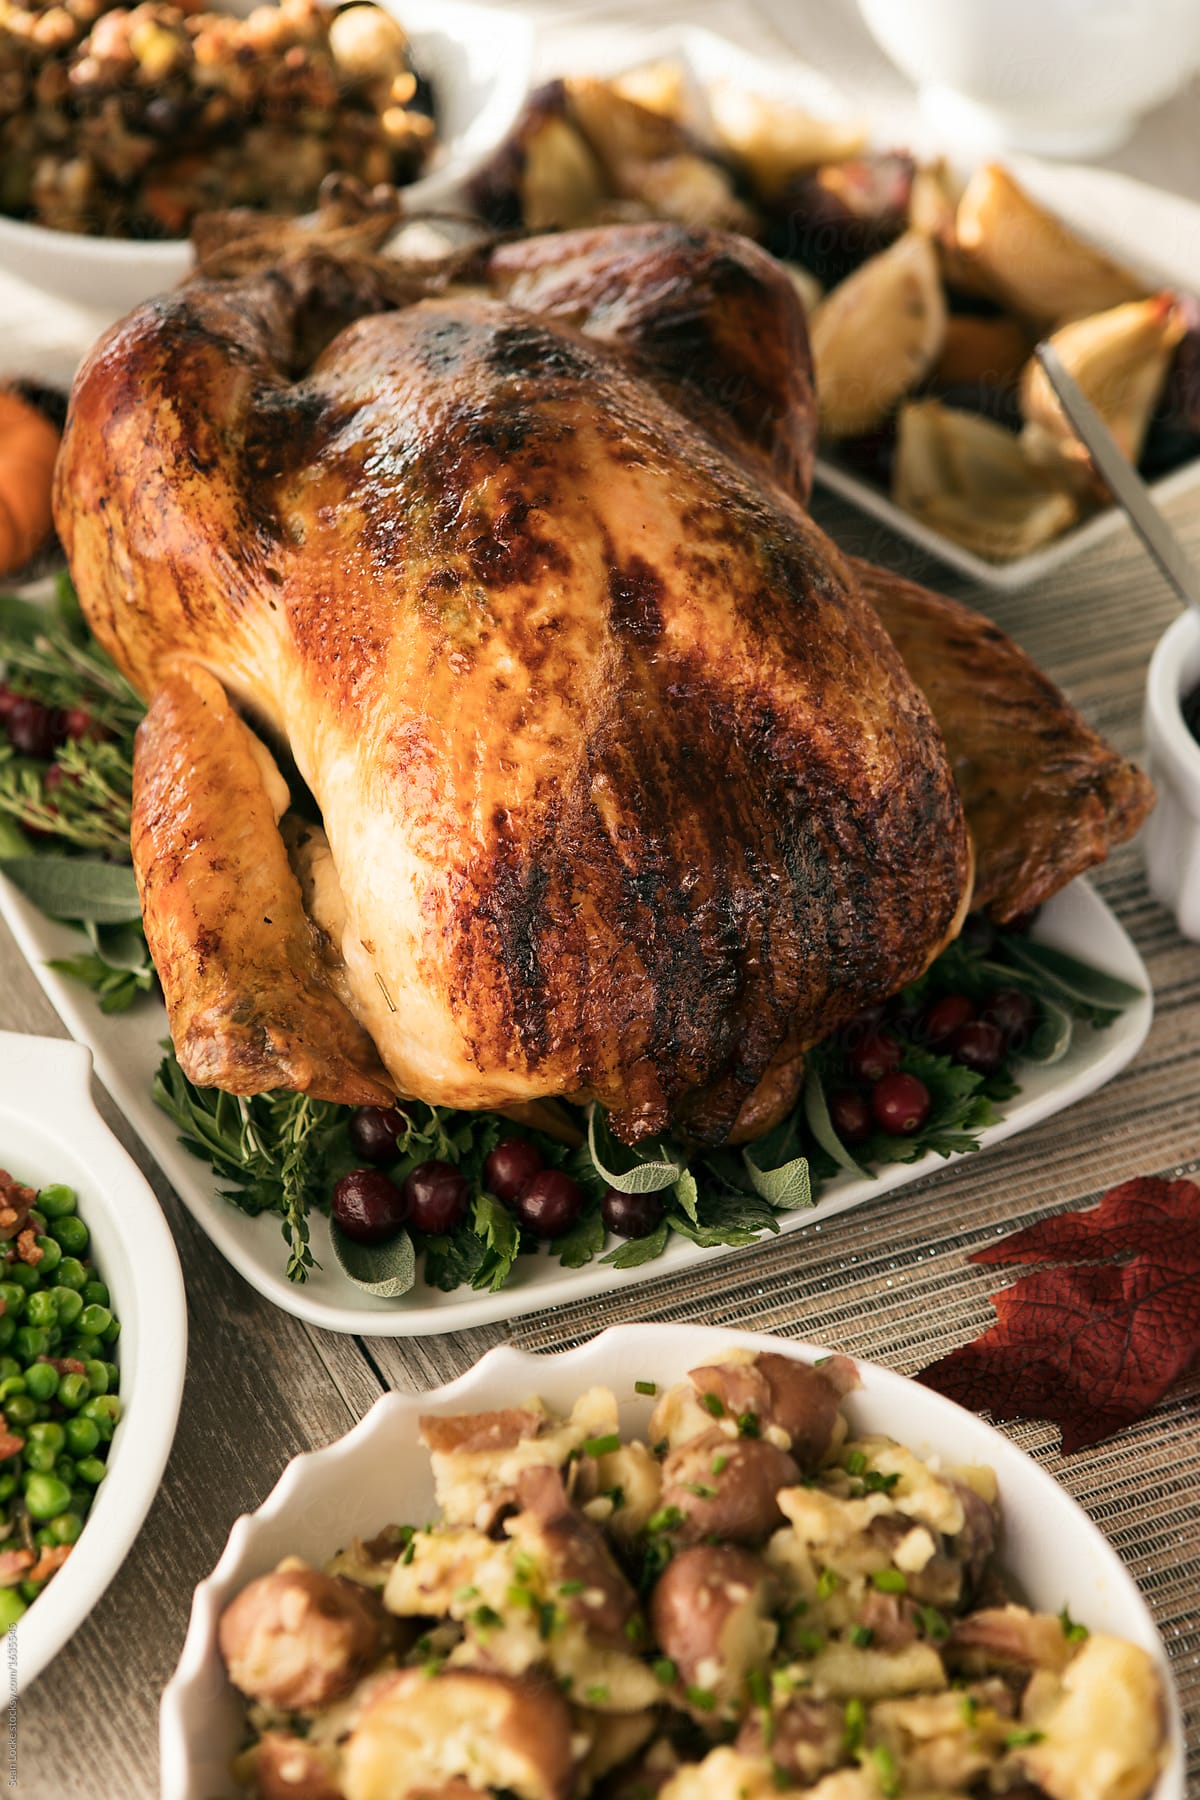 Thanksgiving: Roast Turkey On Table With Side Dishes